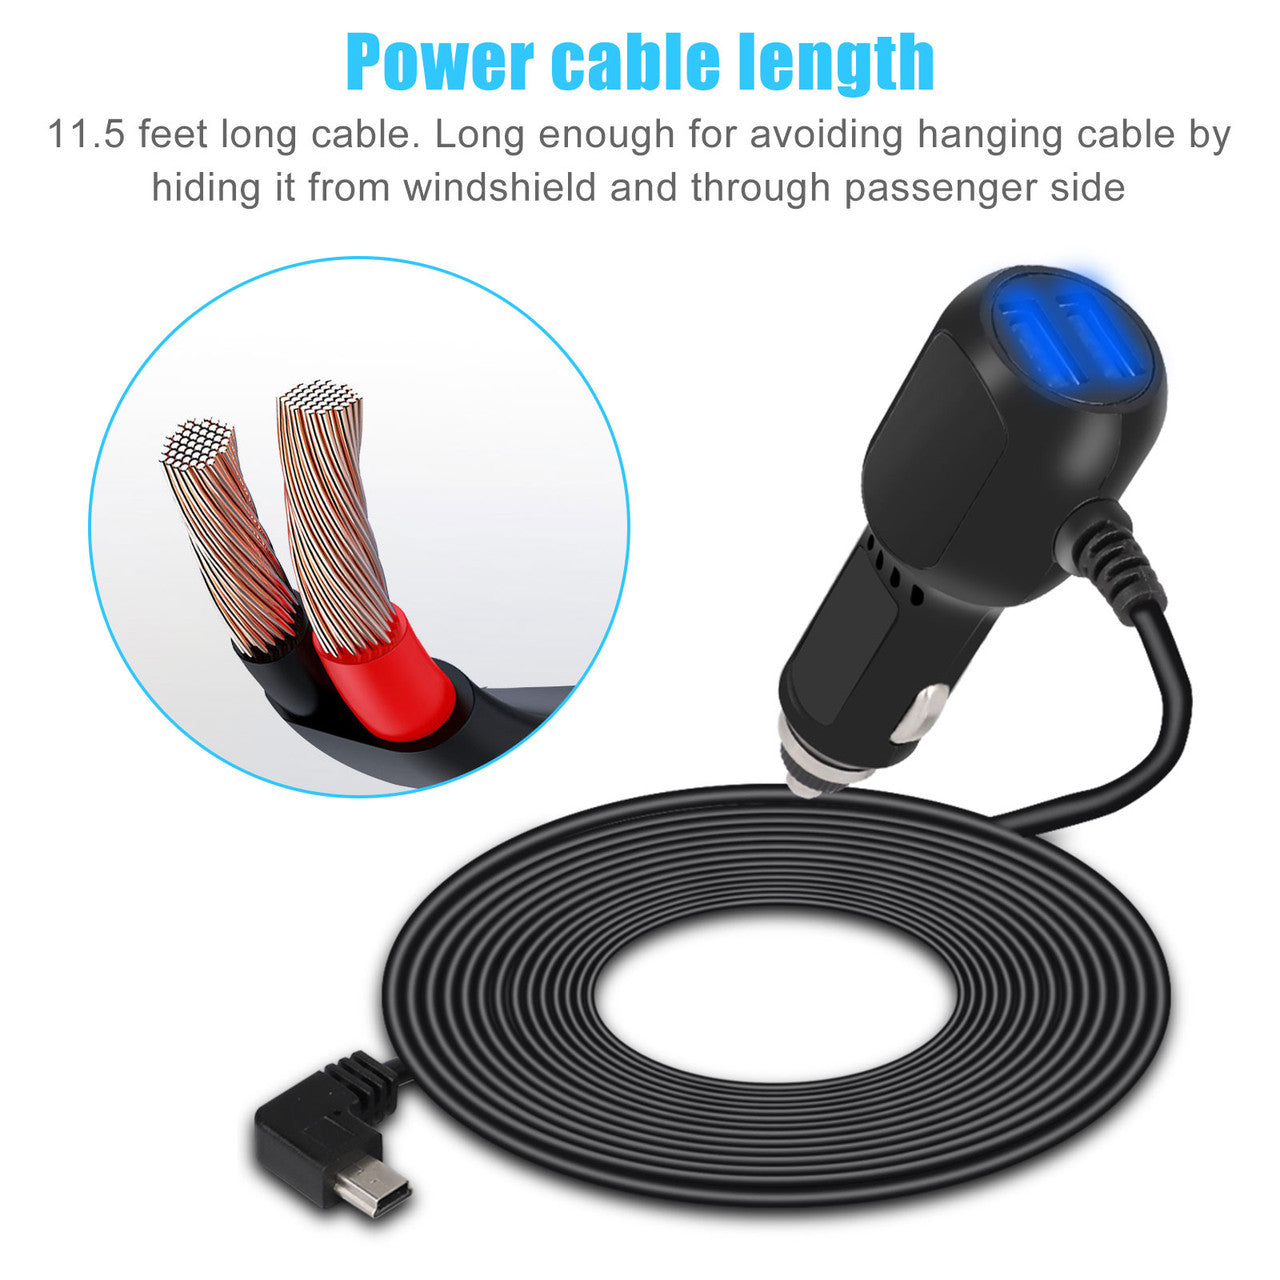 Dash Cam Car Charger Mini USB Cable, Compatible with Navigational GPS and Dash Cam DVRs